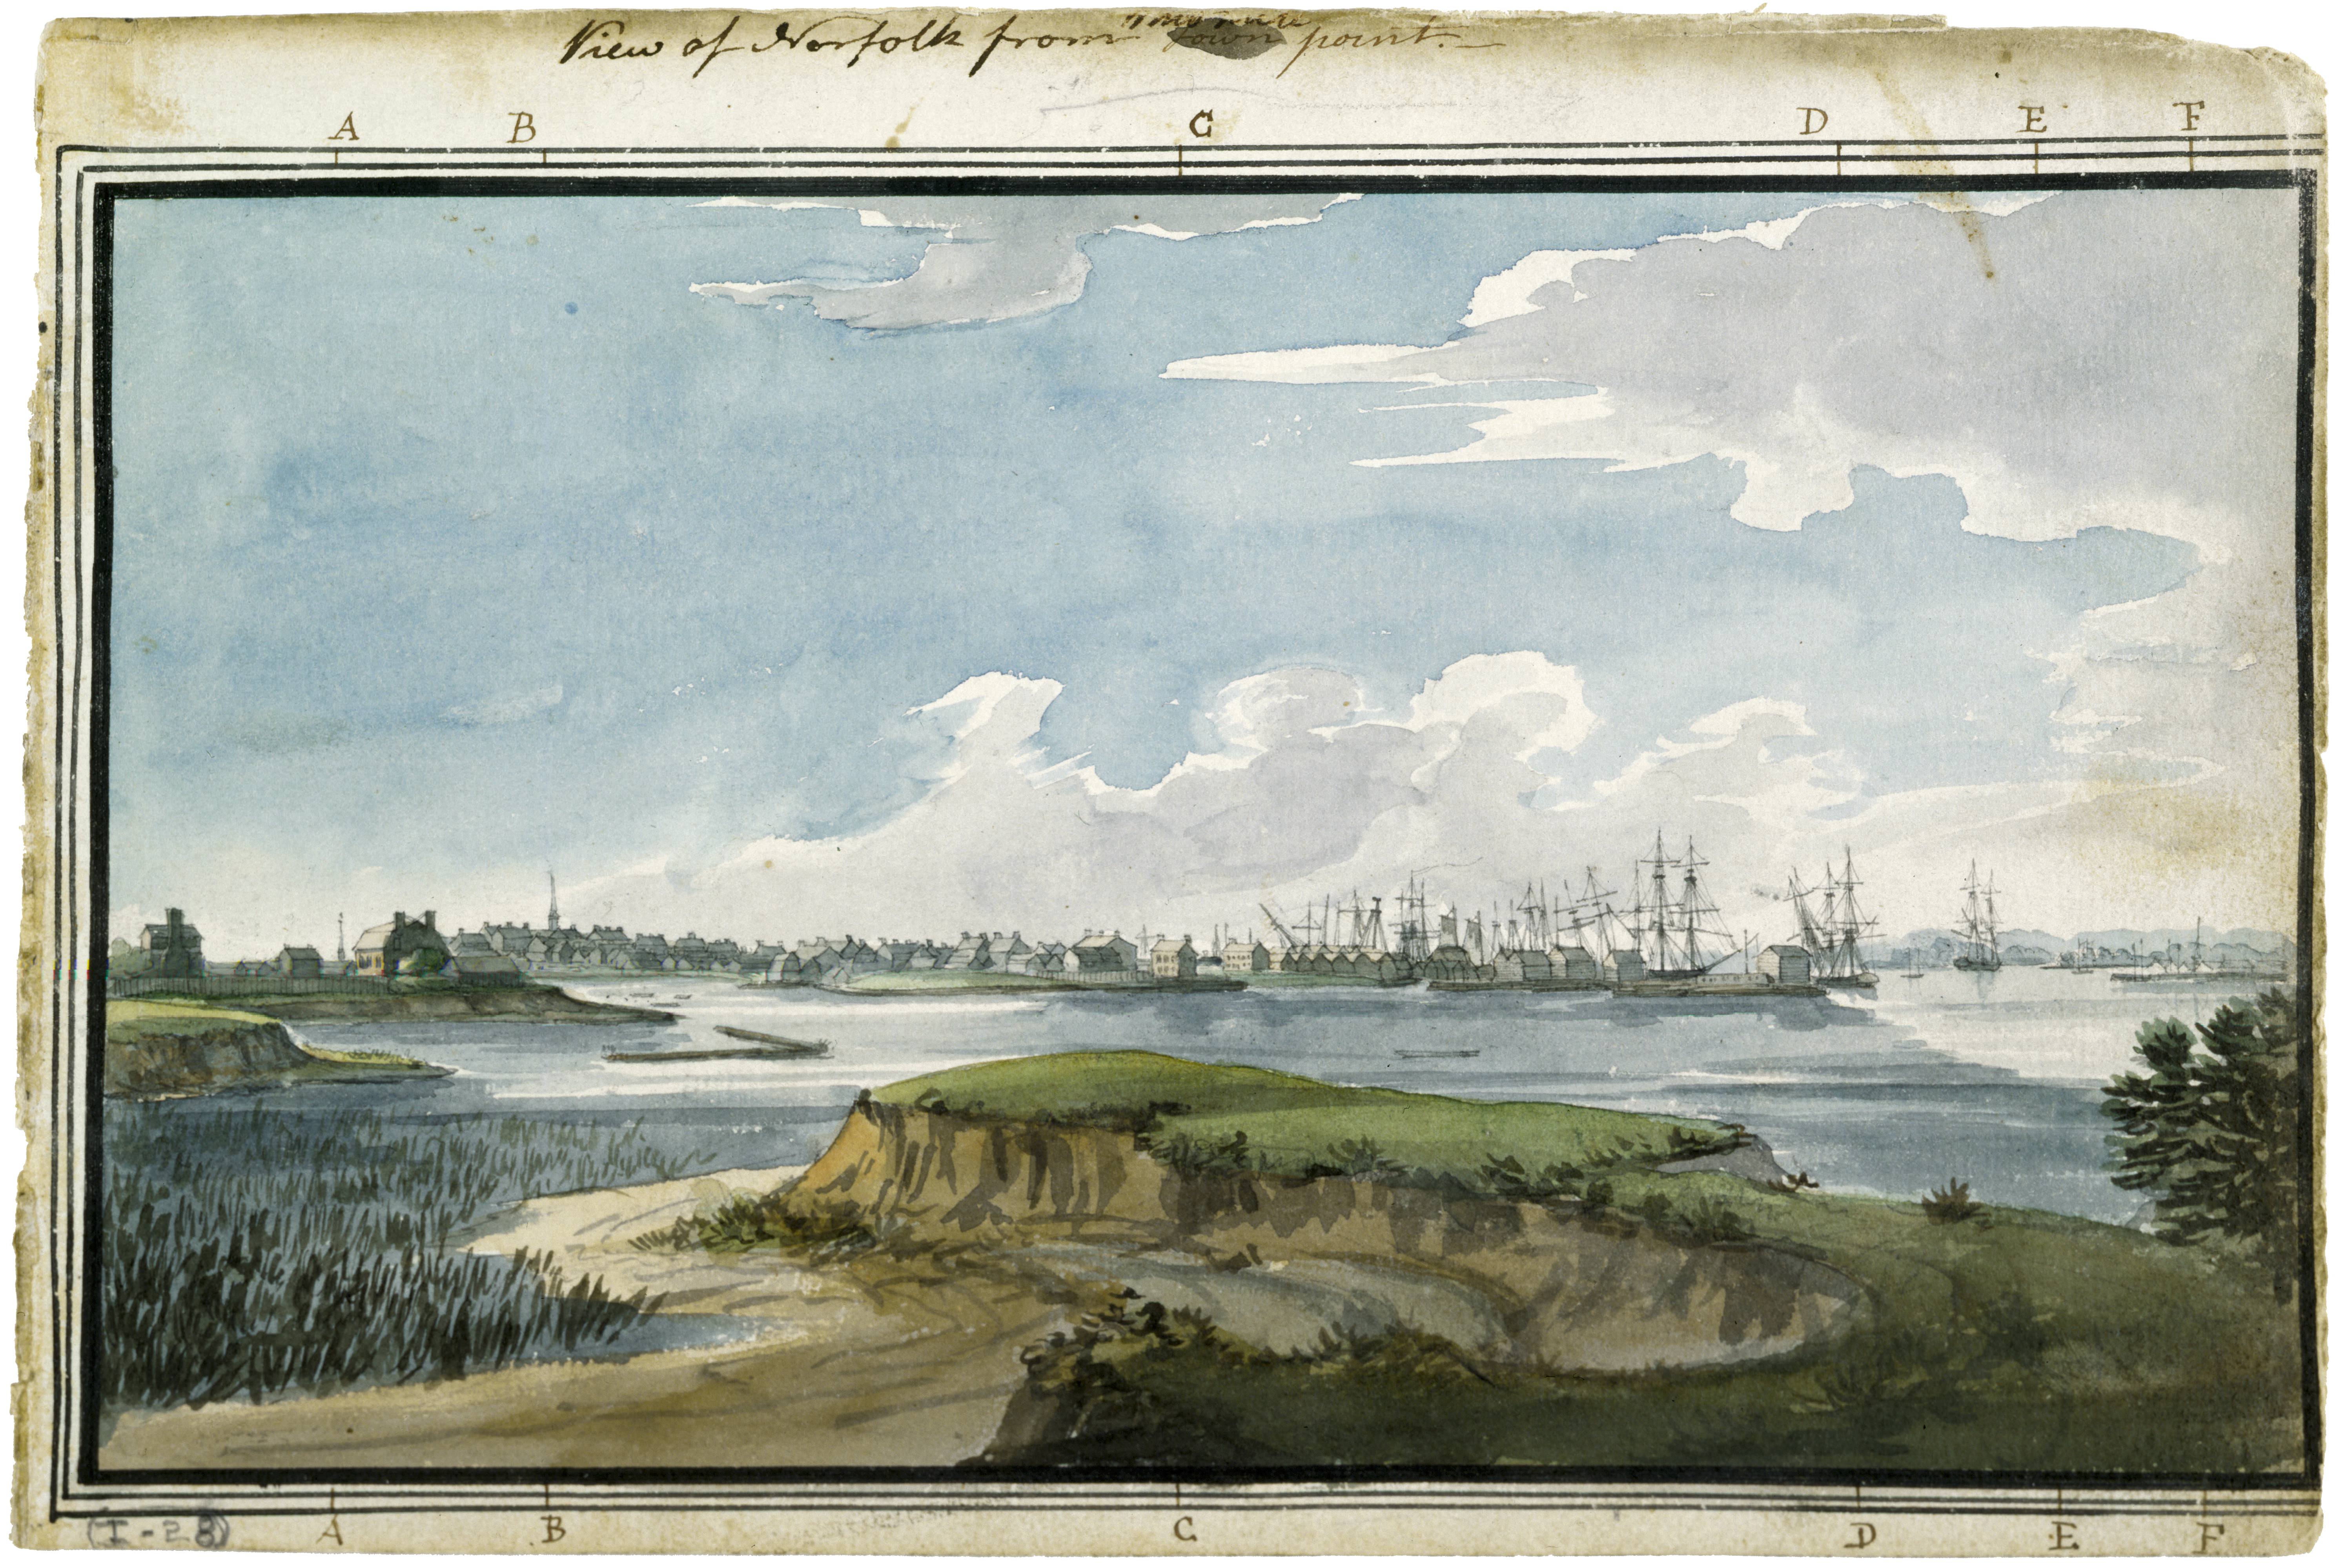 1796–98. watercolour, 17.7 x 26.6 cm. Collection of Maryland Historical Society (1960-108-1-1-28).